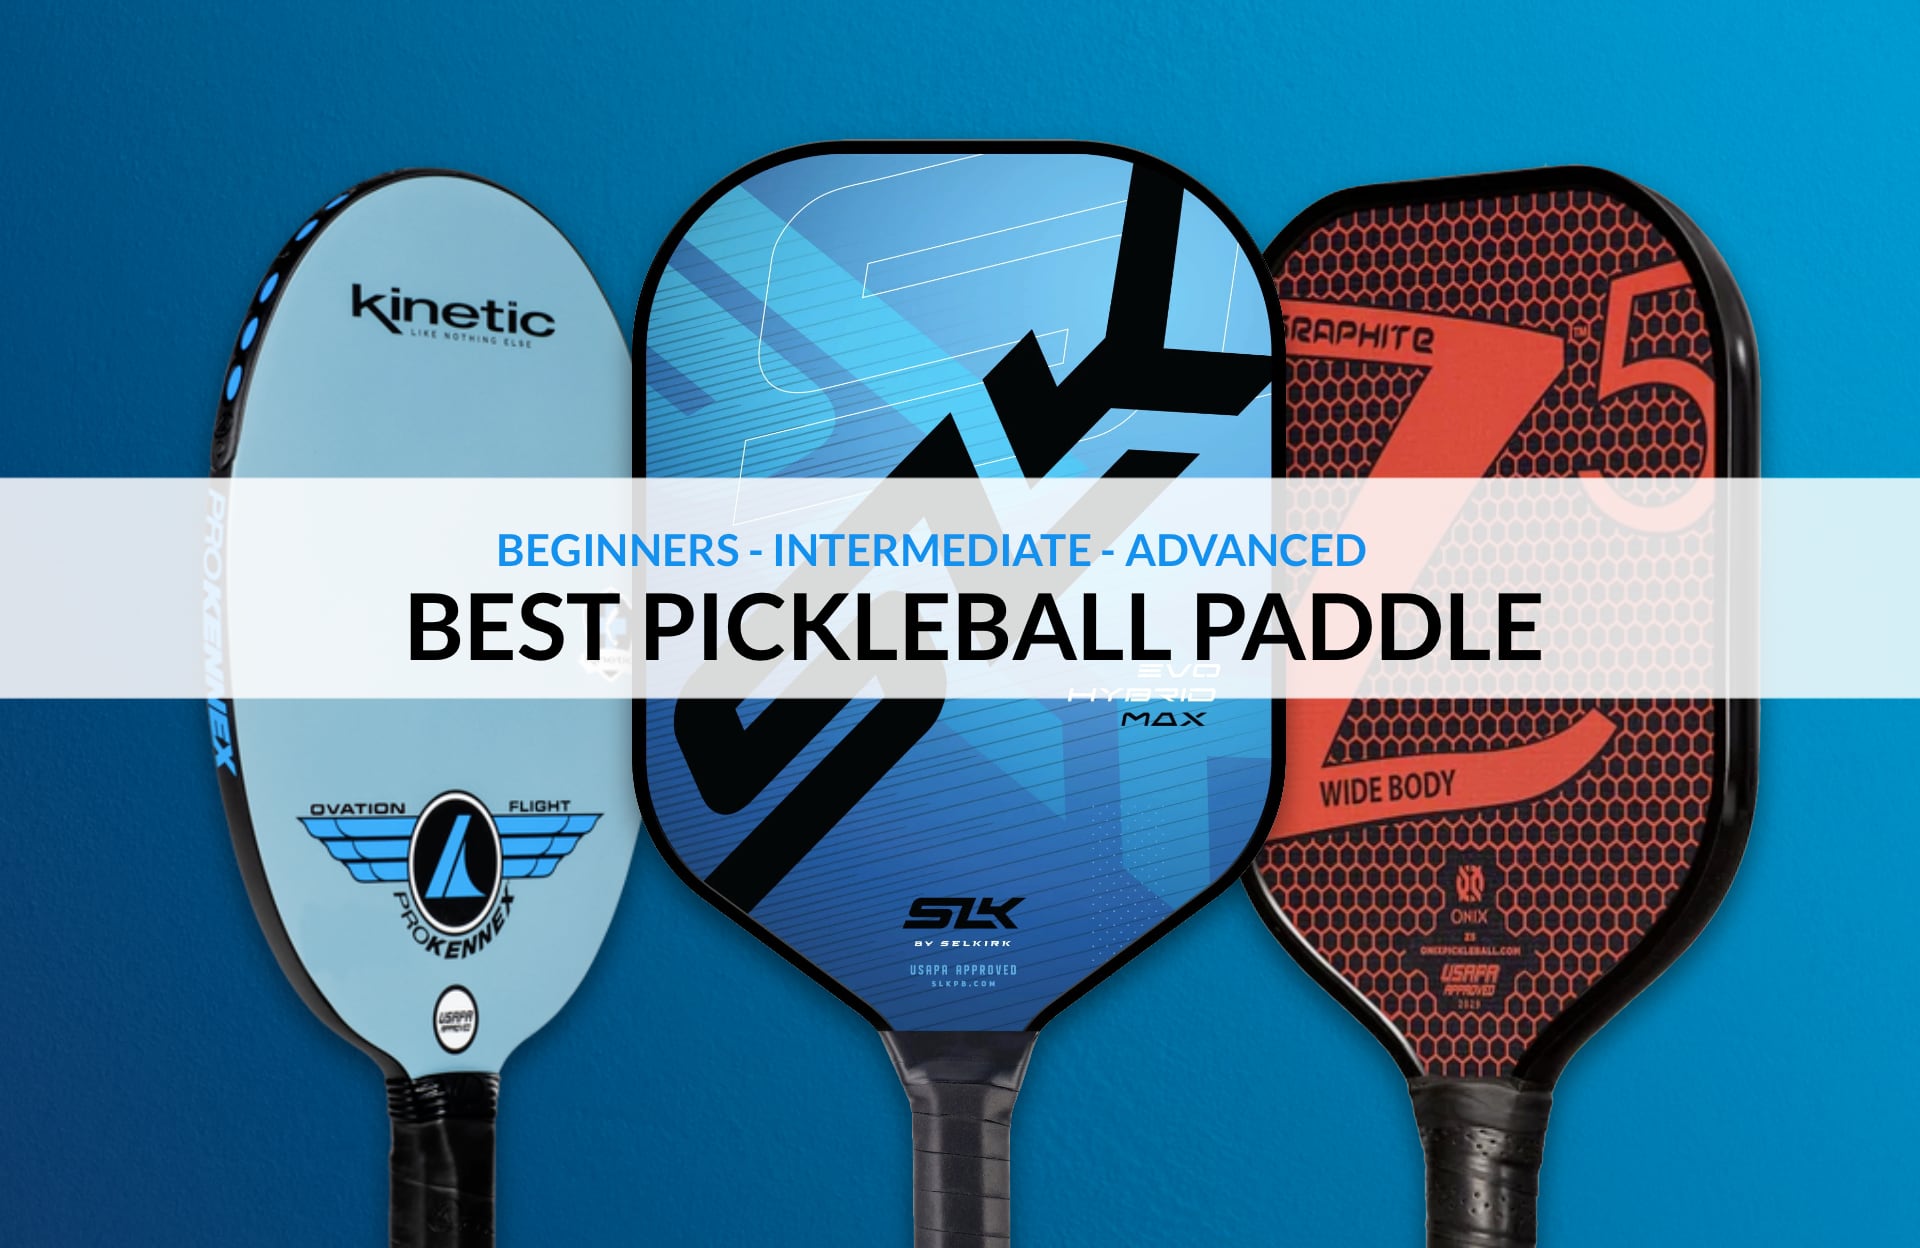 Best Pickleball Paddle - Top picks for all types of players